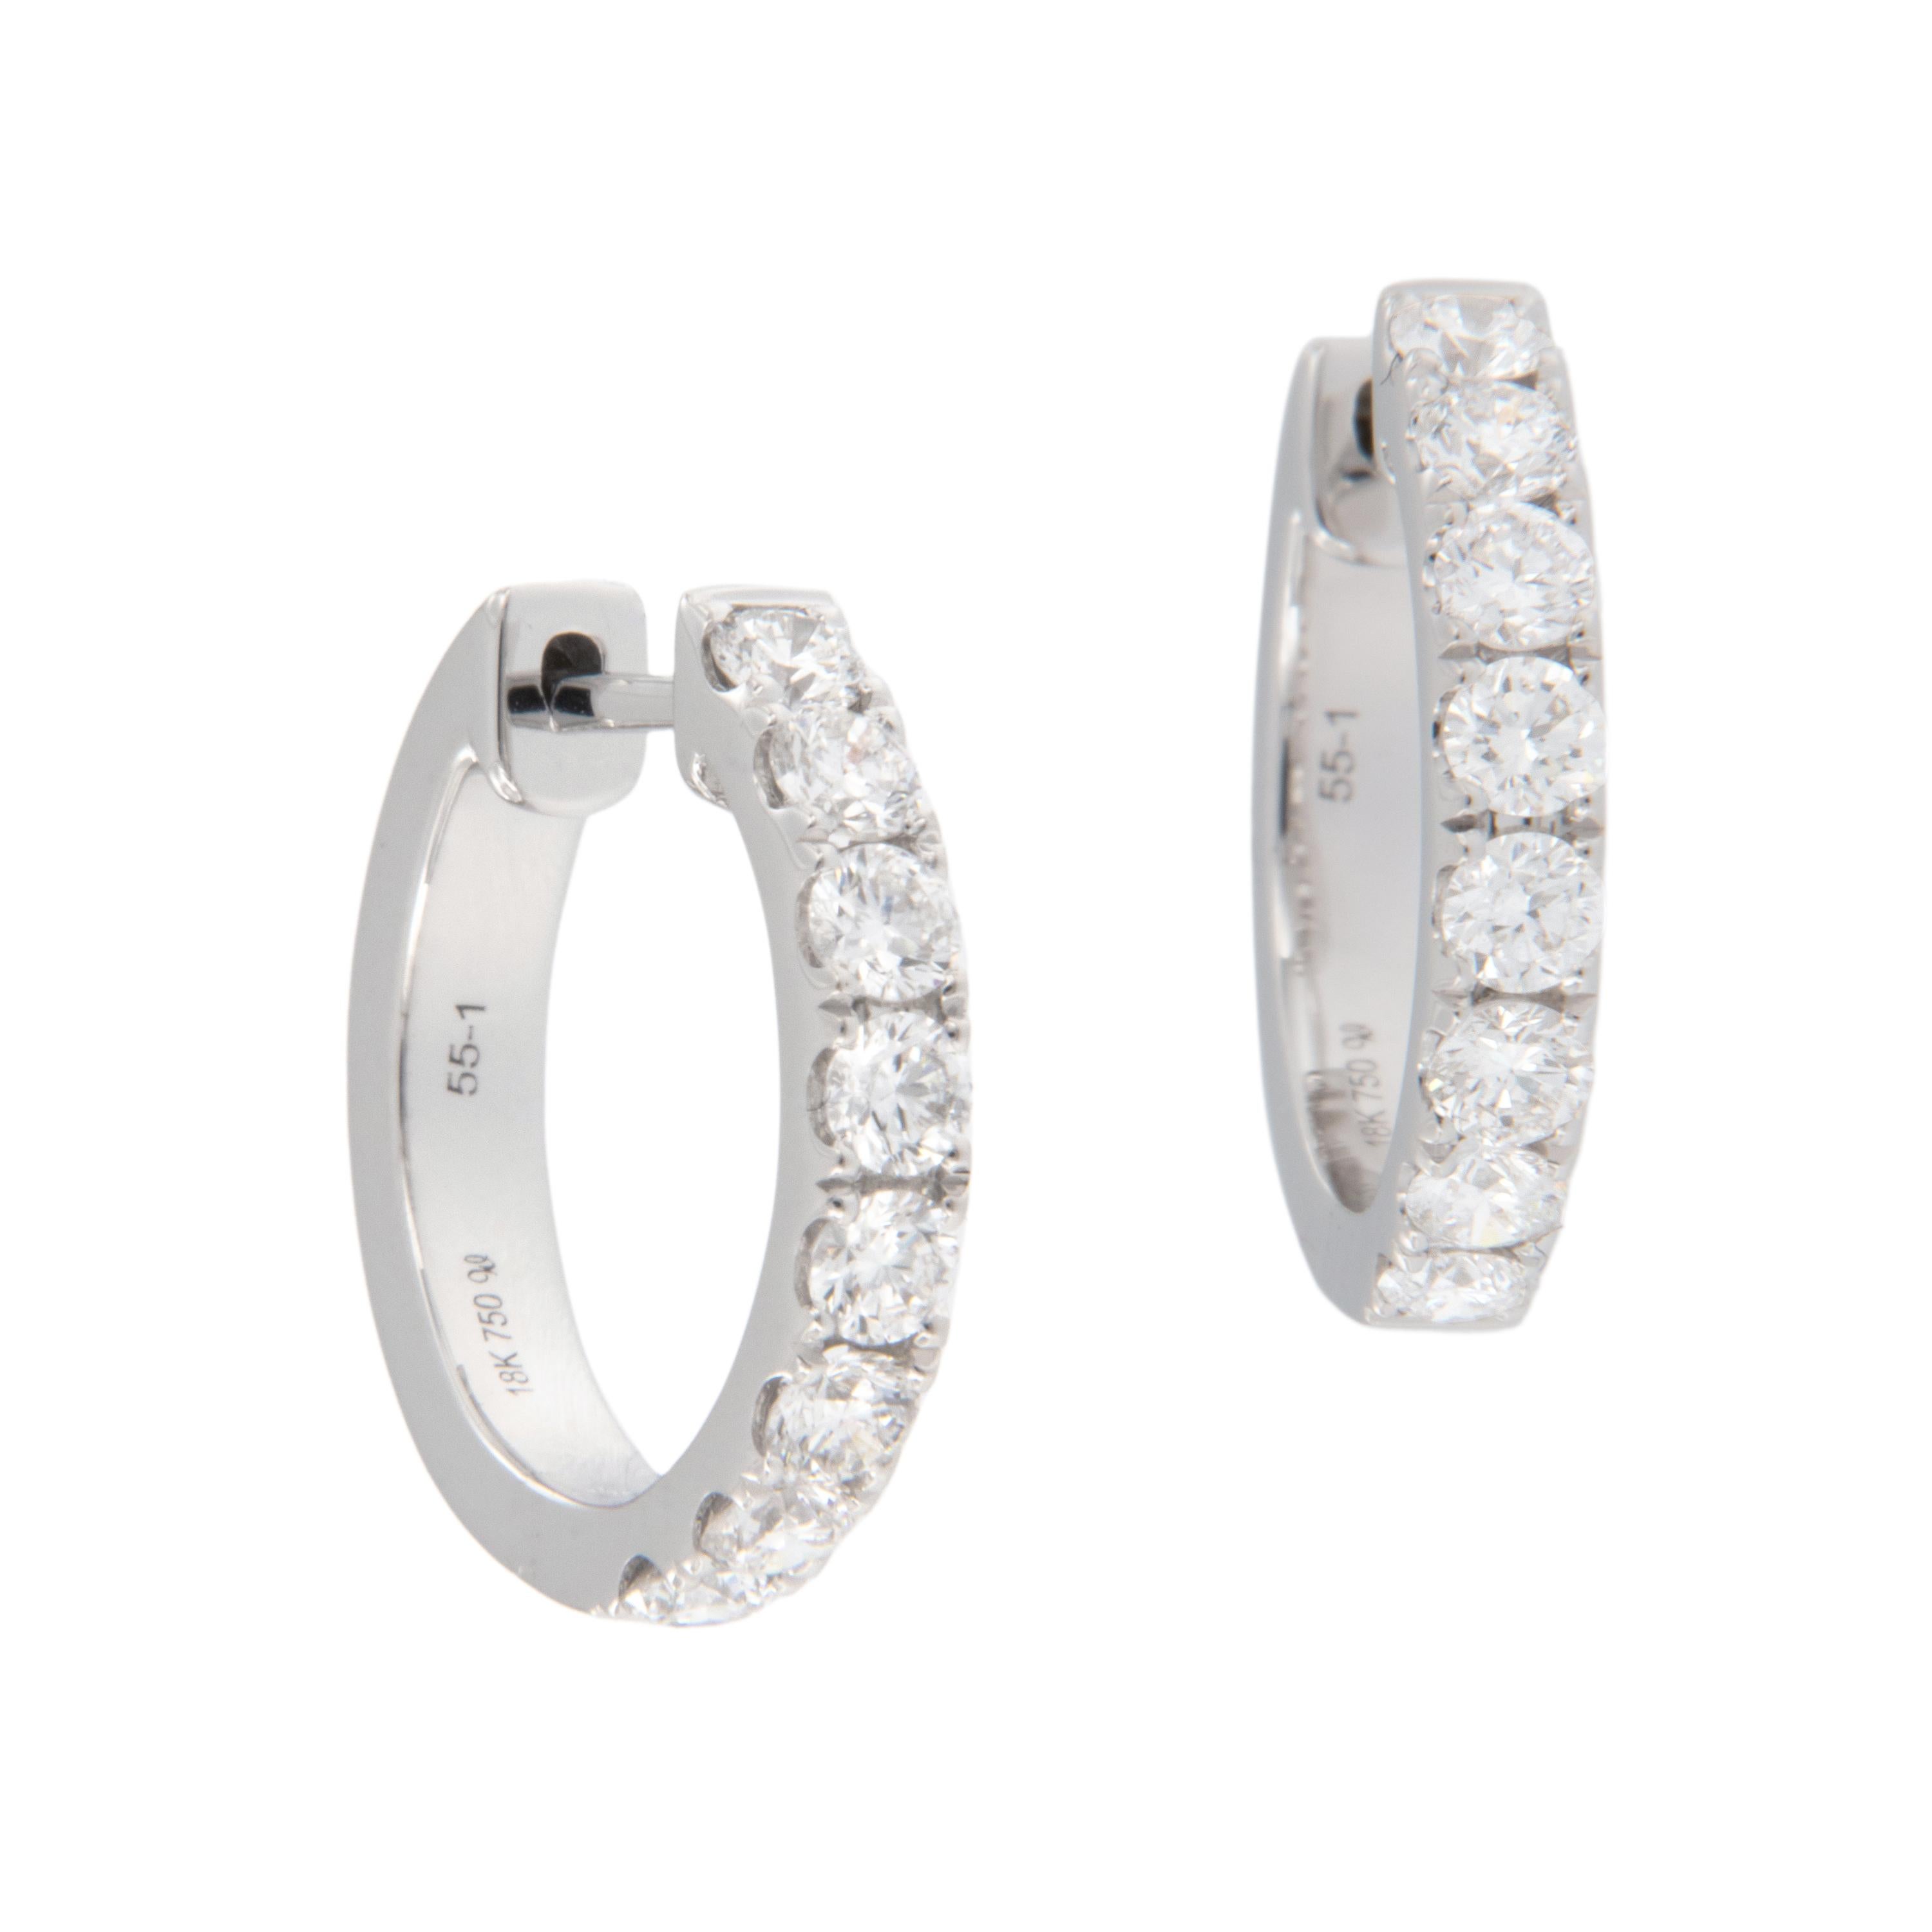 These adorable earrings are perfect for every day wear with flair! Made from fine 18 karat white gold these round hoop earrings with 16 G VS diamonds = 0.62 Cttw will be your most comfortable go to earrings. 2.3mm wide x 14mm diameter. Complimentary